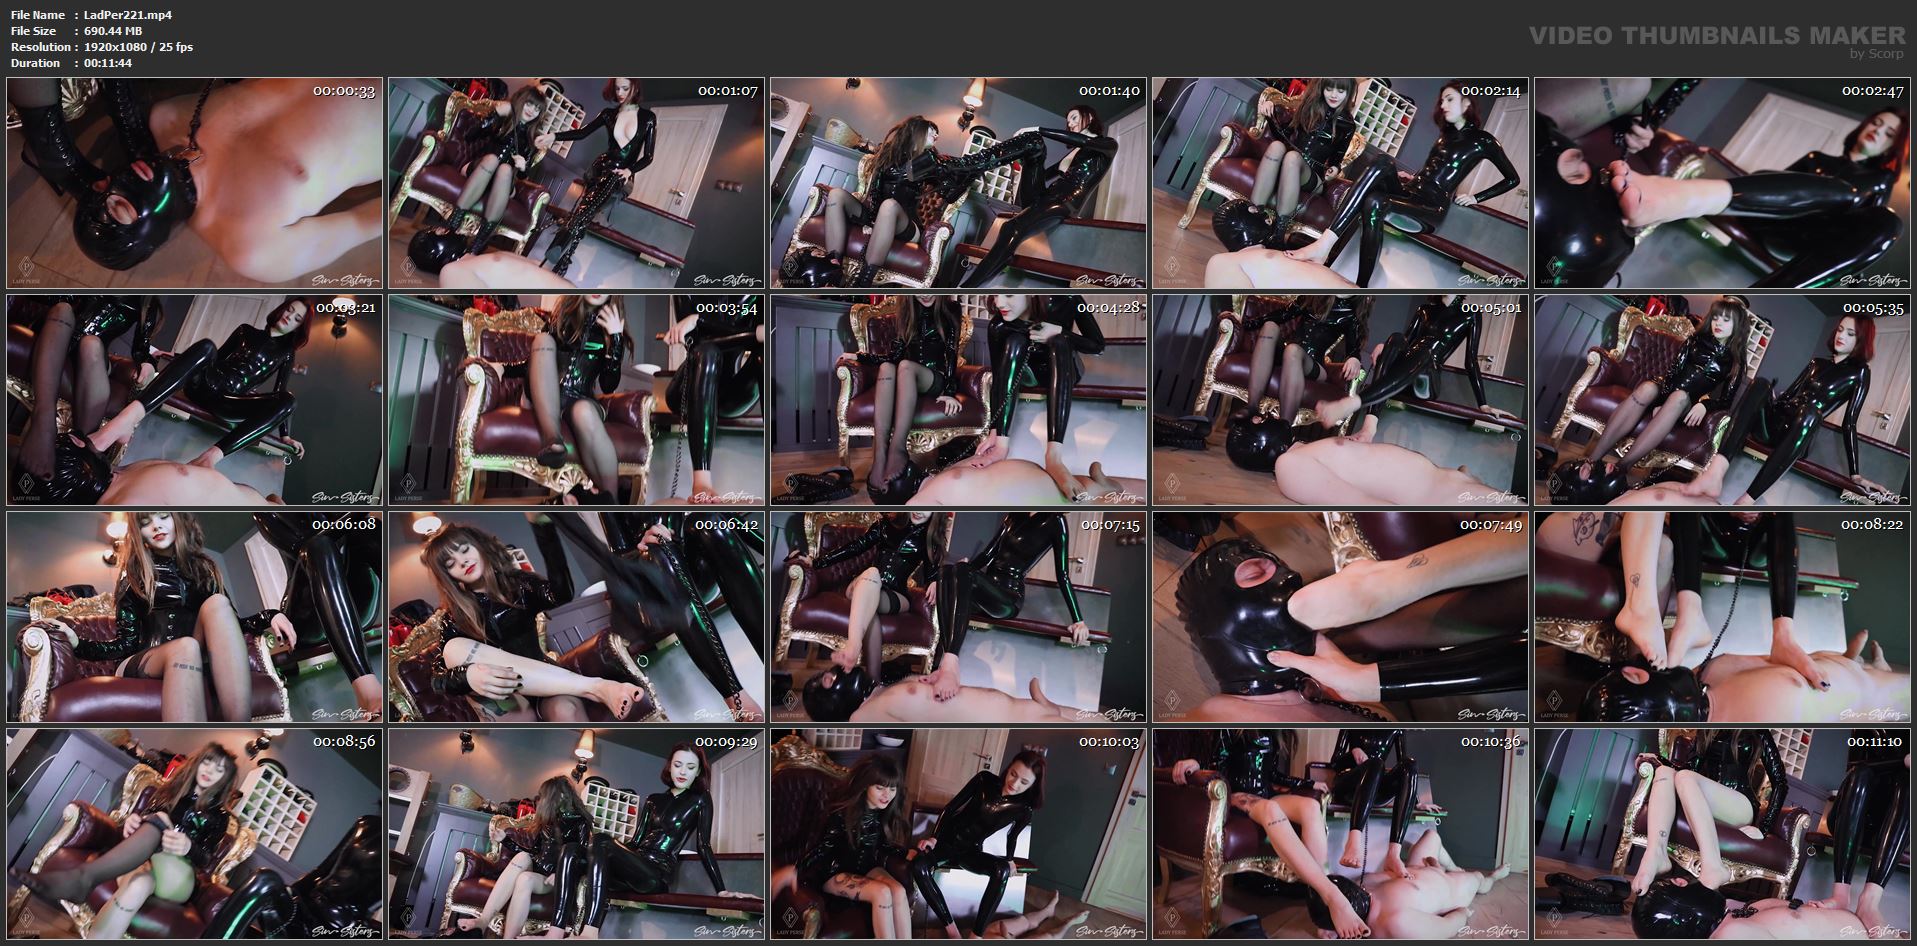 Foot Heaven By Me And Mistress Mavka - LADY PERSE - FULL HD/1080p/MP4